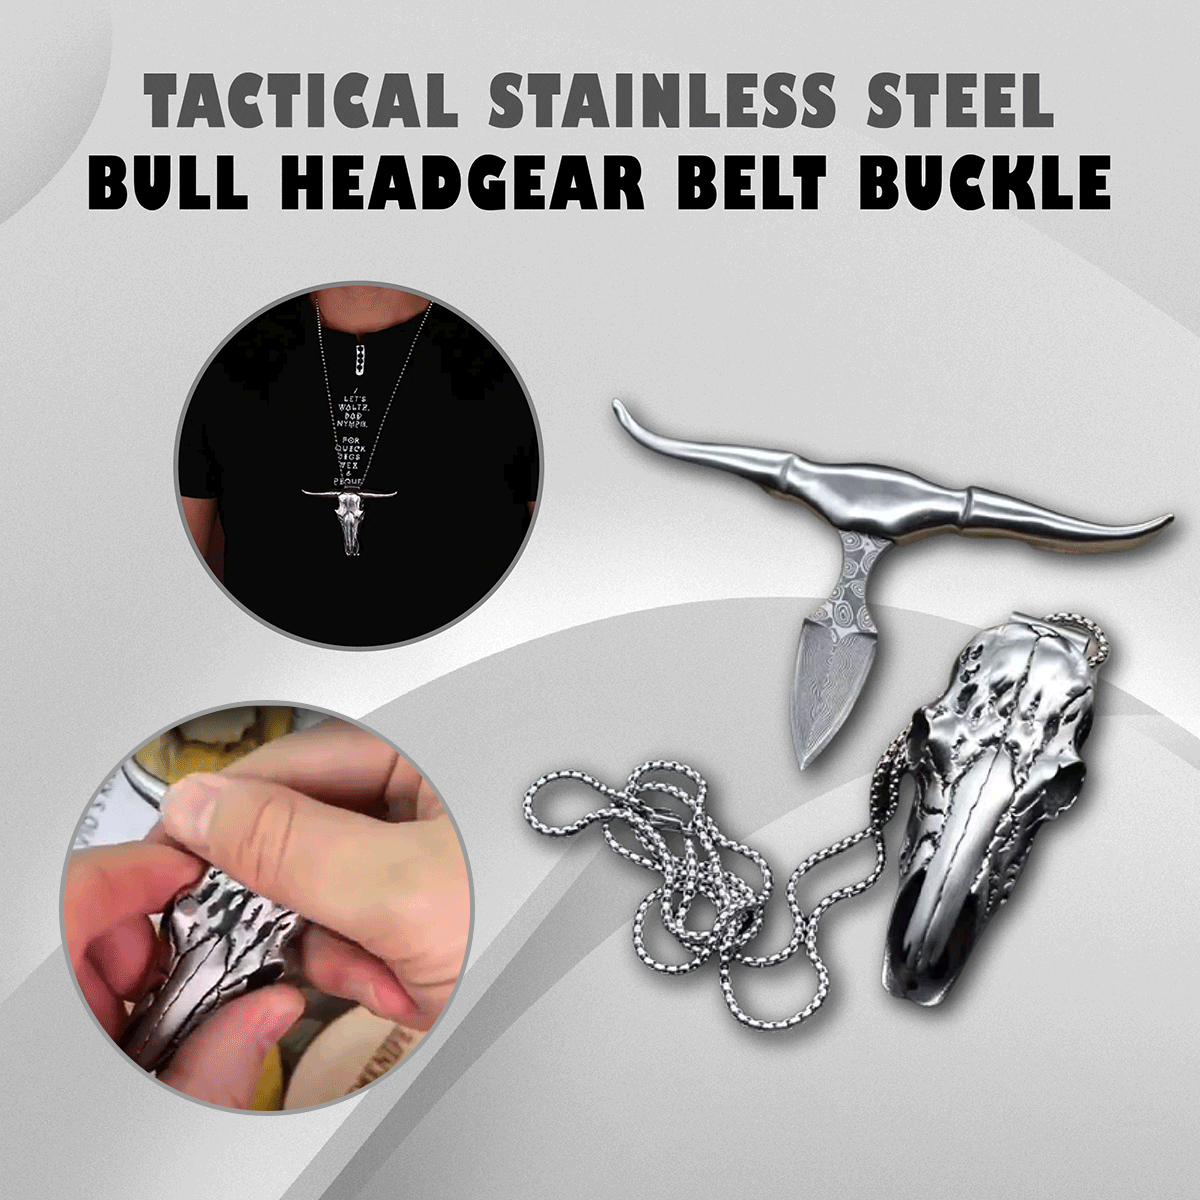 Tactical Stainless Steel Bull Headgear Belt Buckle Gifts for Husband